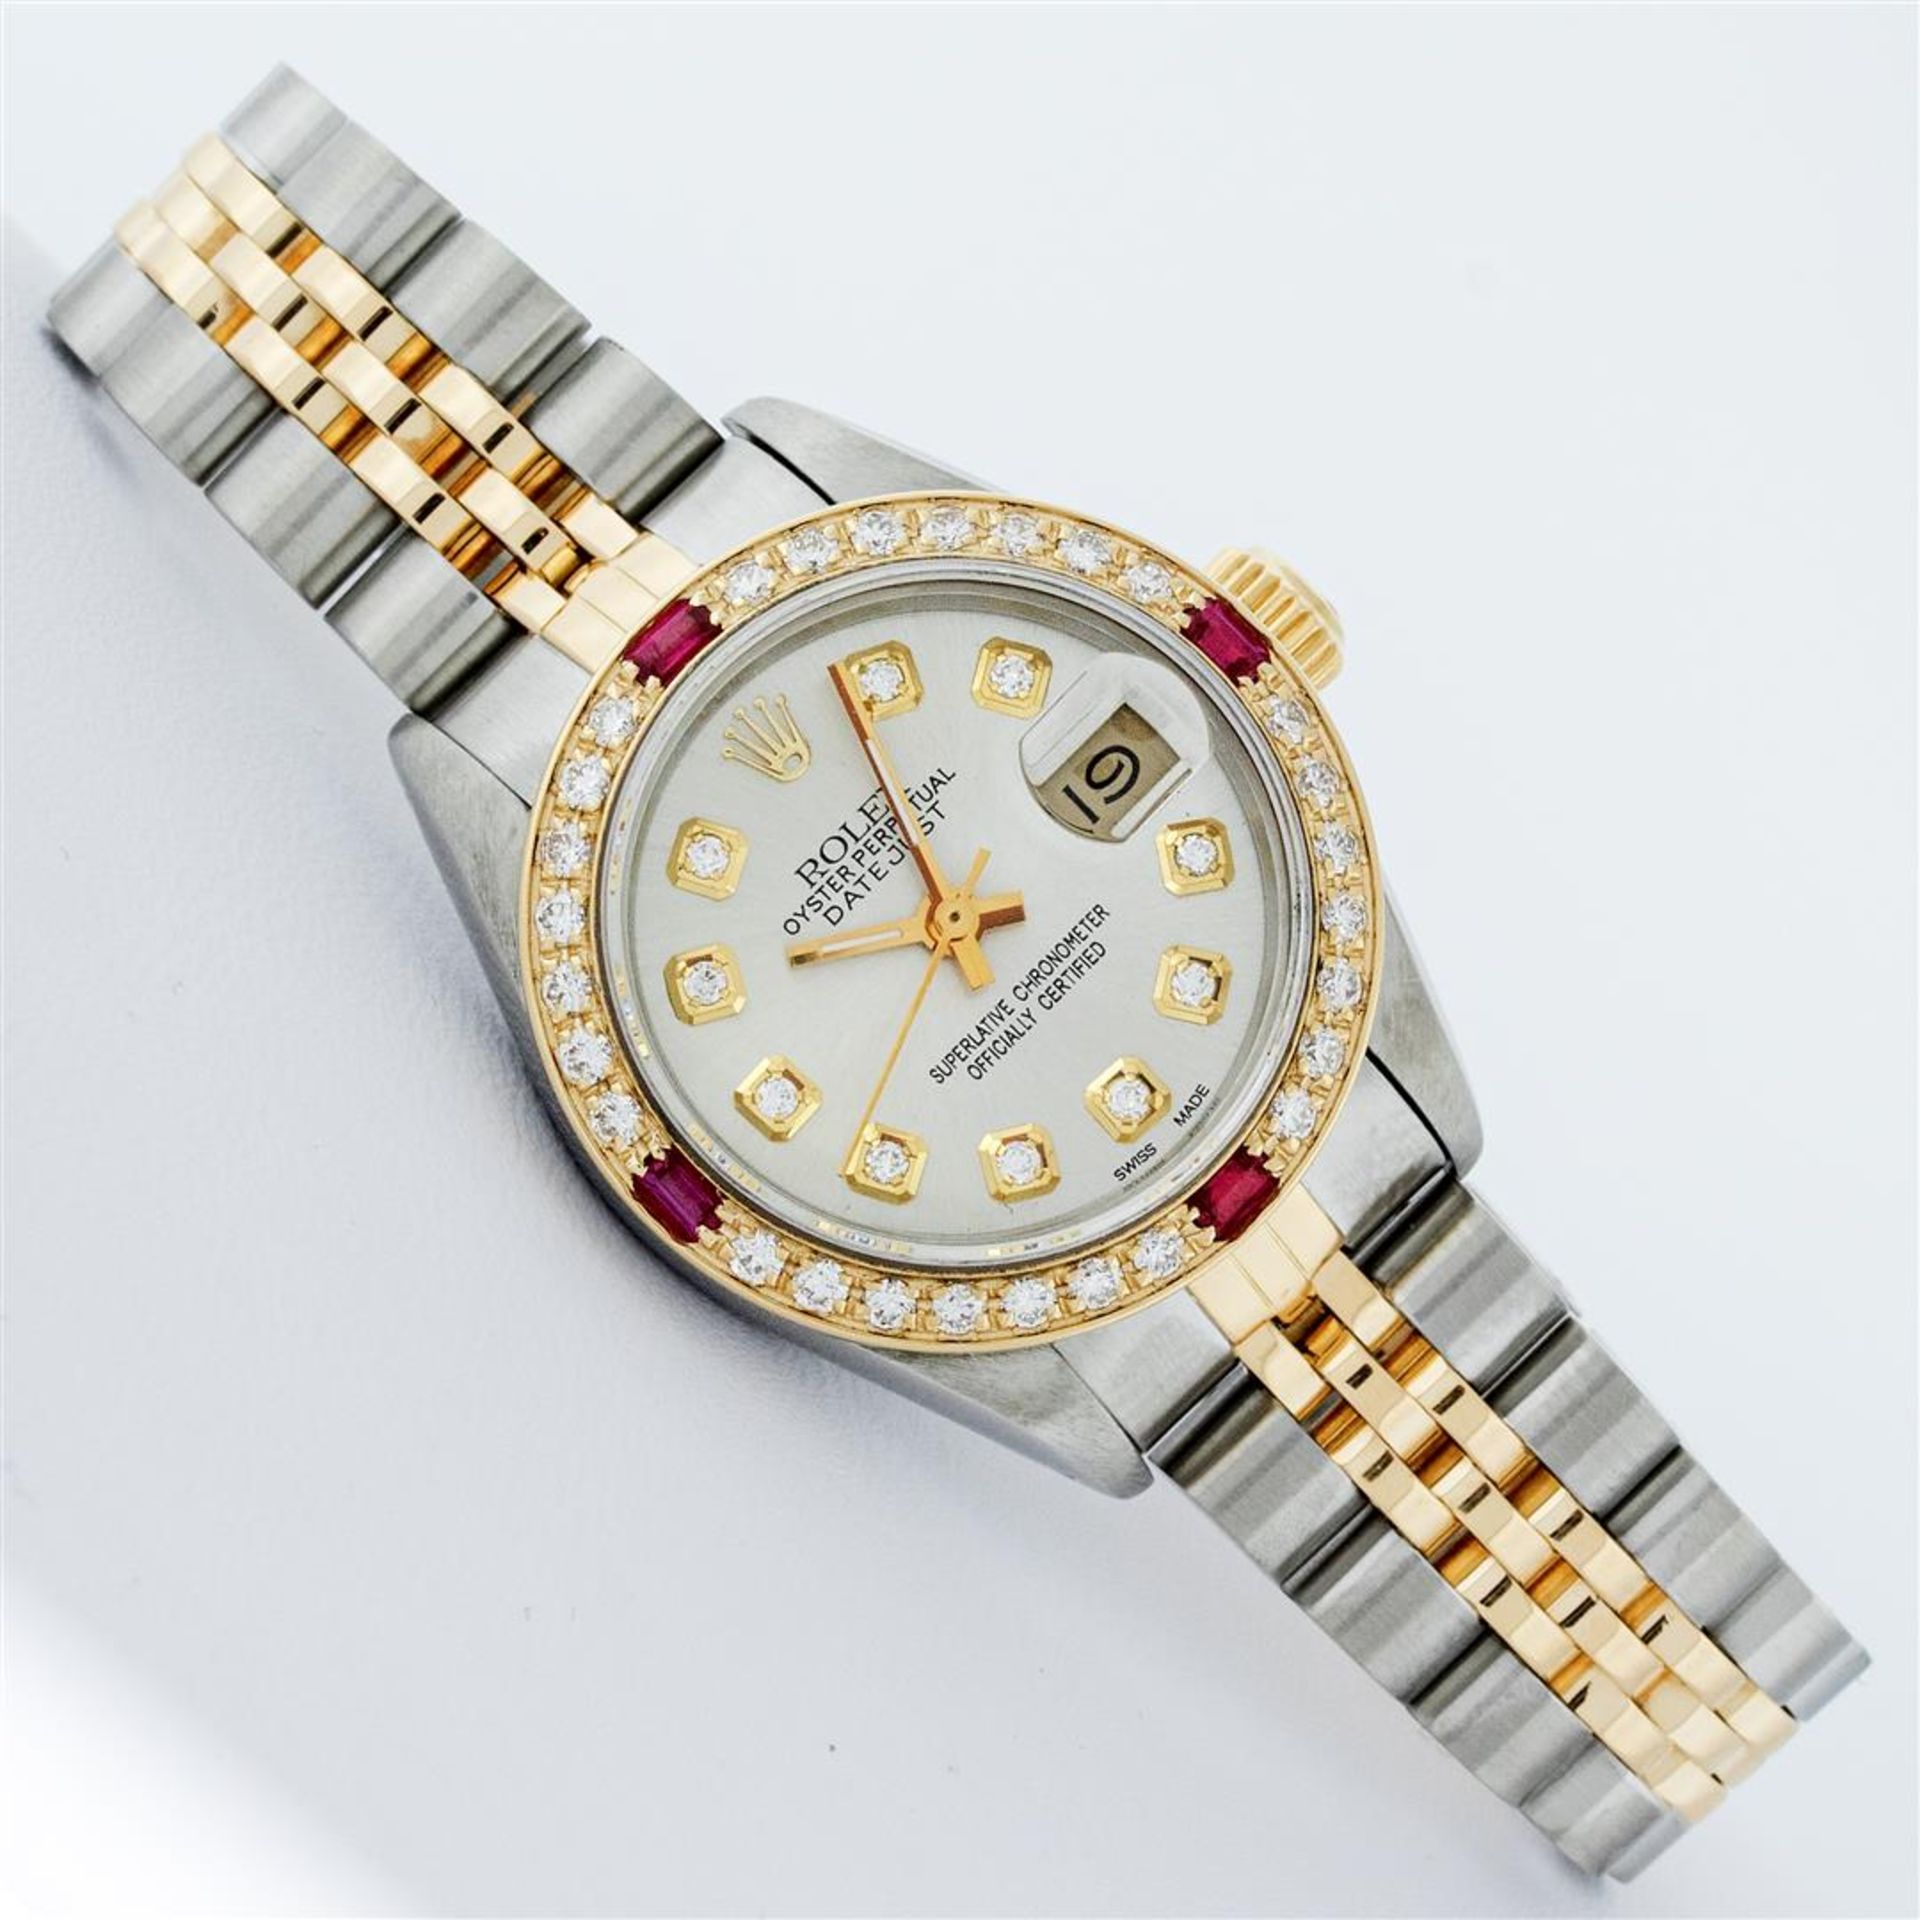 Rolex Ladies 2 Tone Silver Diamond & Ruby Oyster Perpetual Datejust Wristwatch - Image 3 of 9